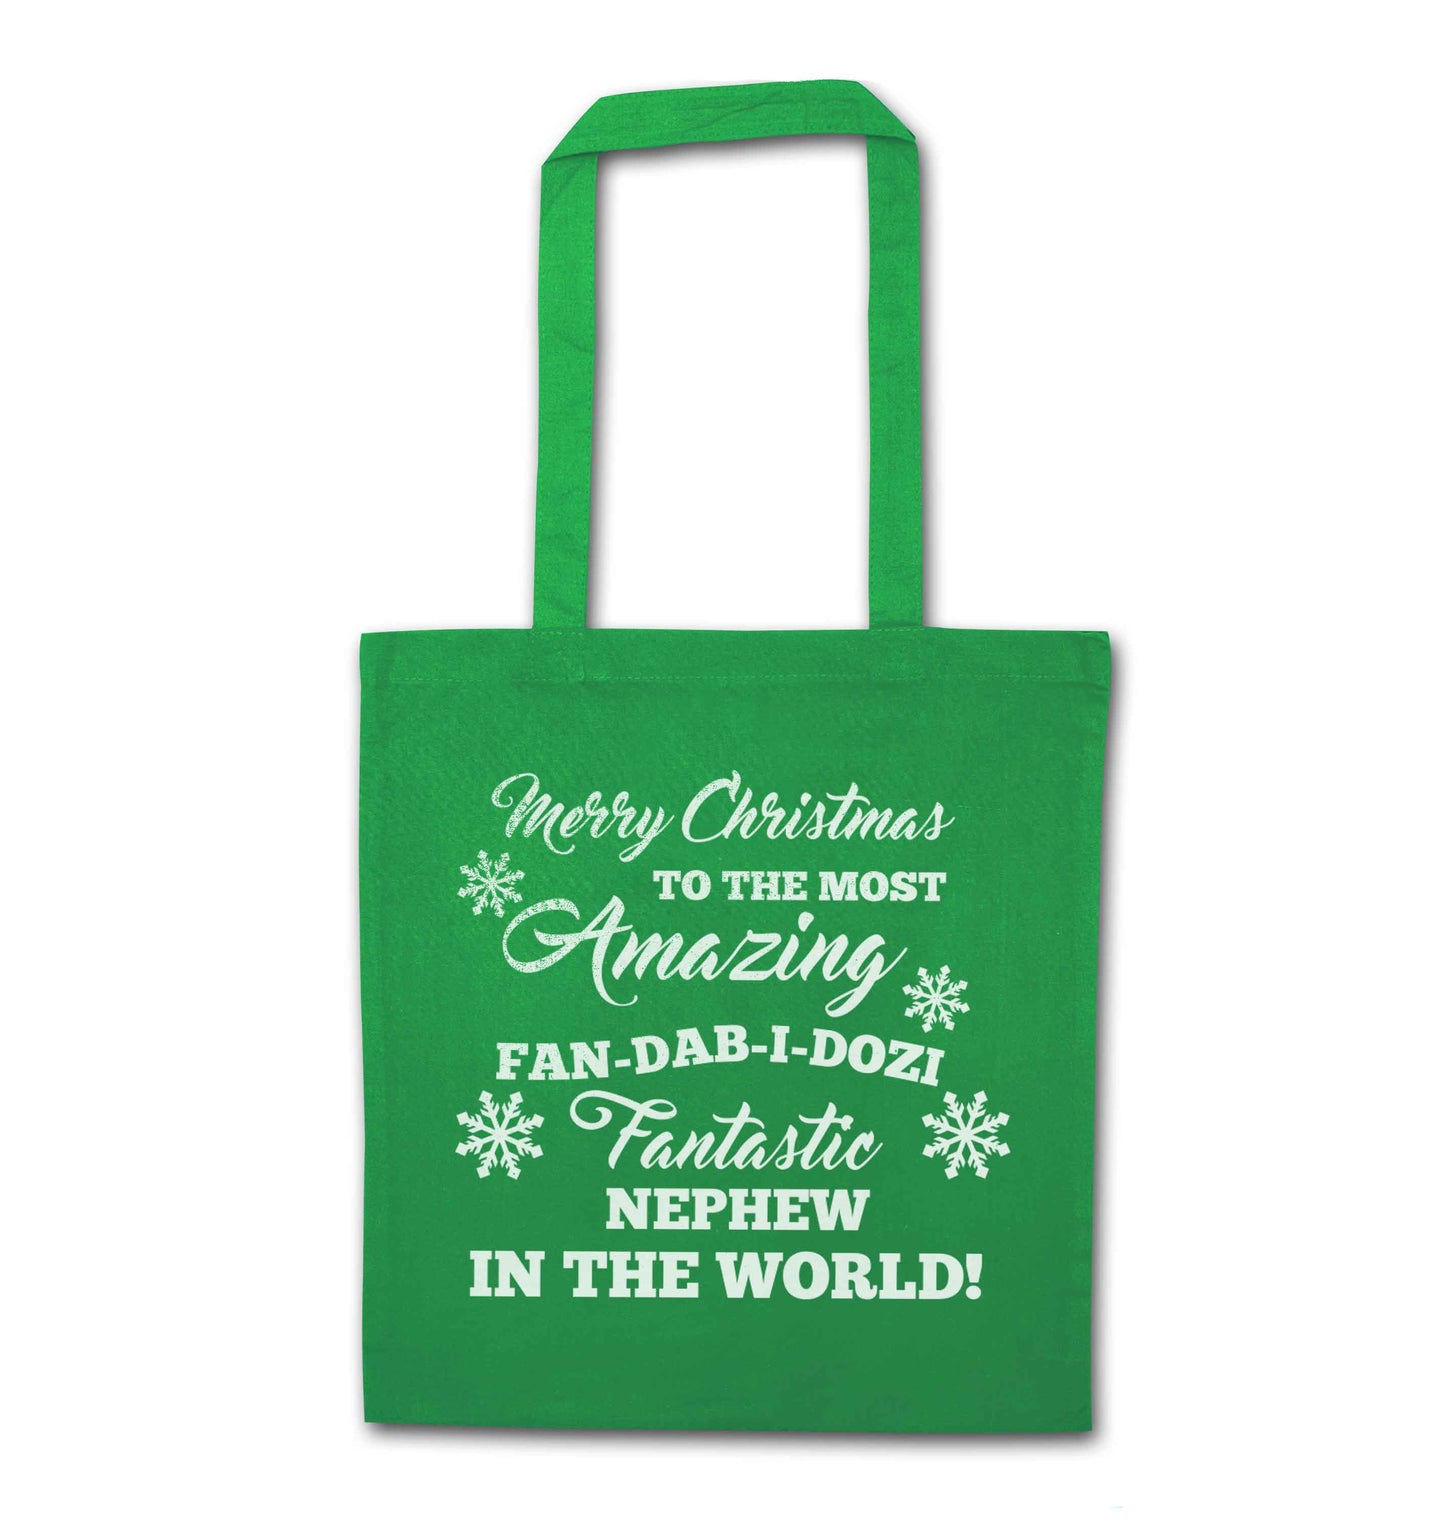 Merry Christmas to the most amazing fan-dab-i-dozi fantasic Nephew in the world green tote bag